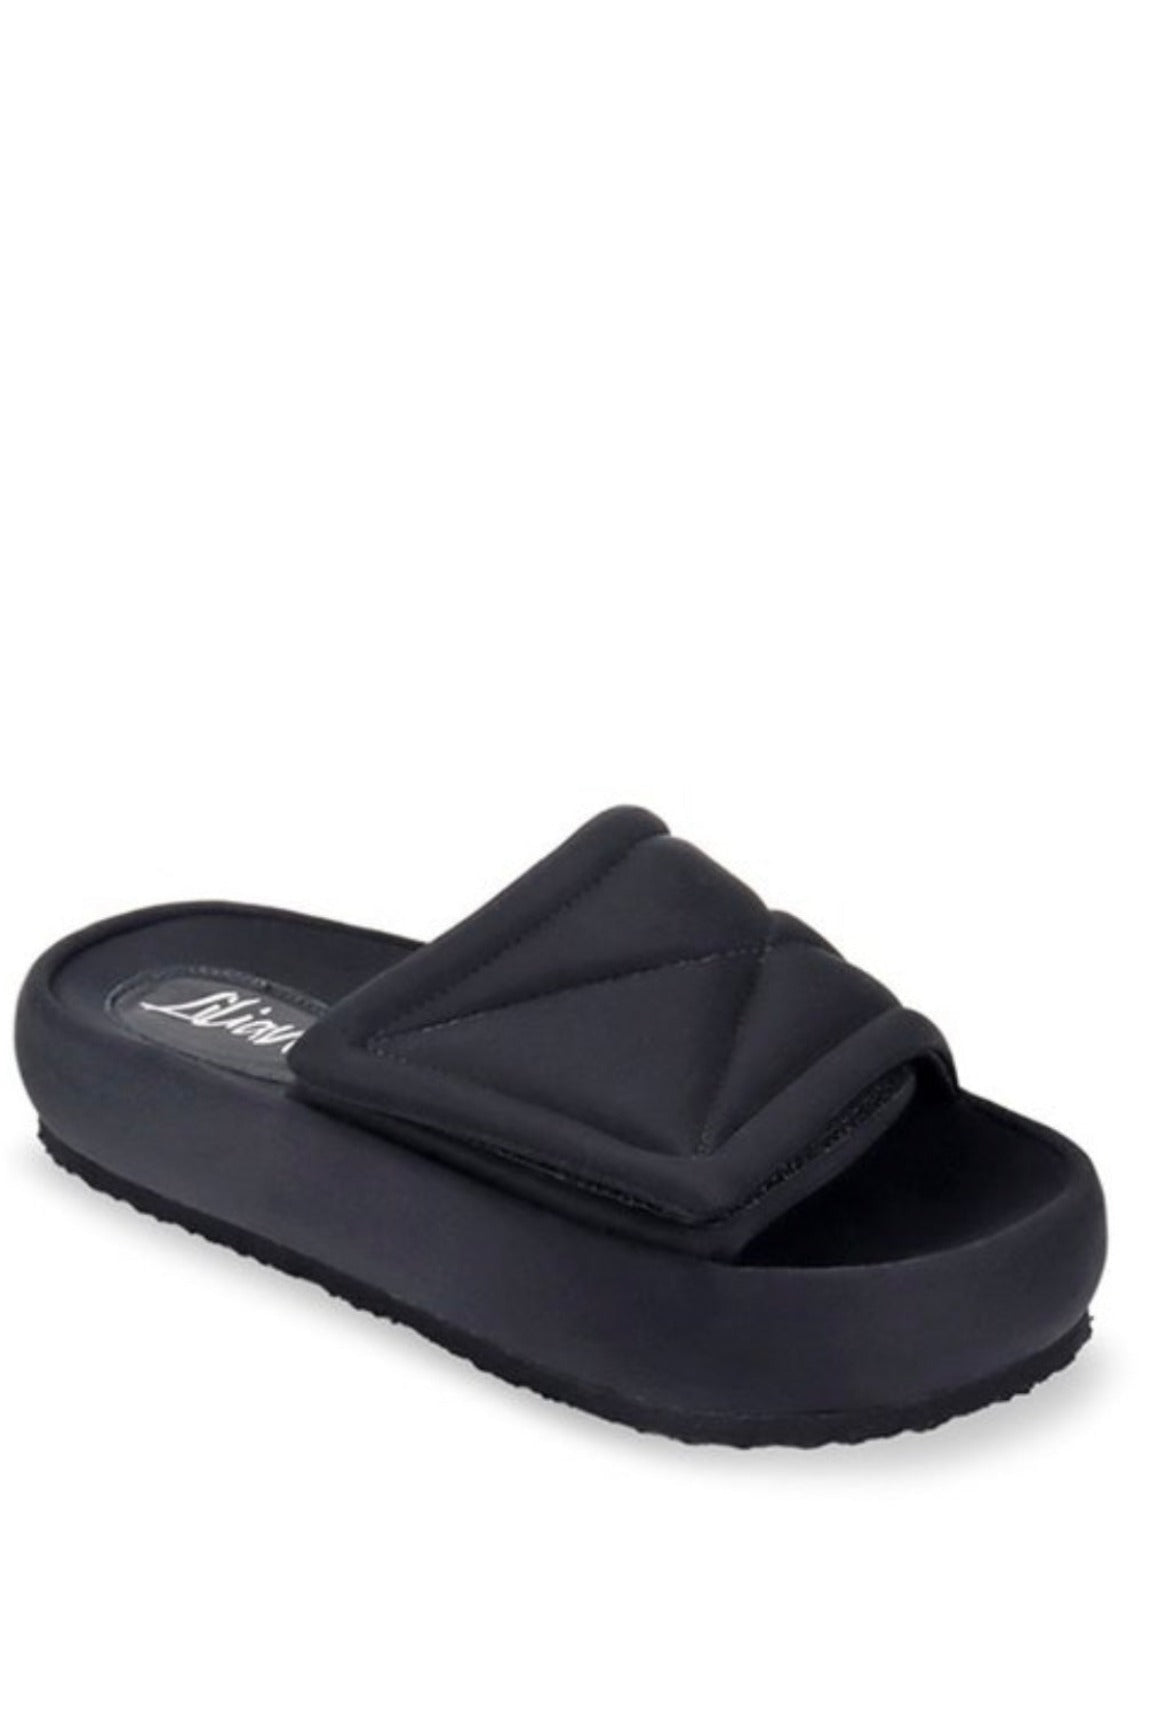 Puffie-1.....Velcro Thick Sole Sandal Slides Liliana Shoes